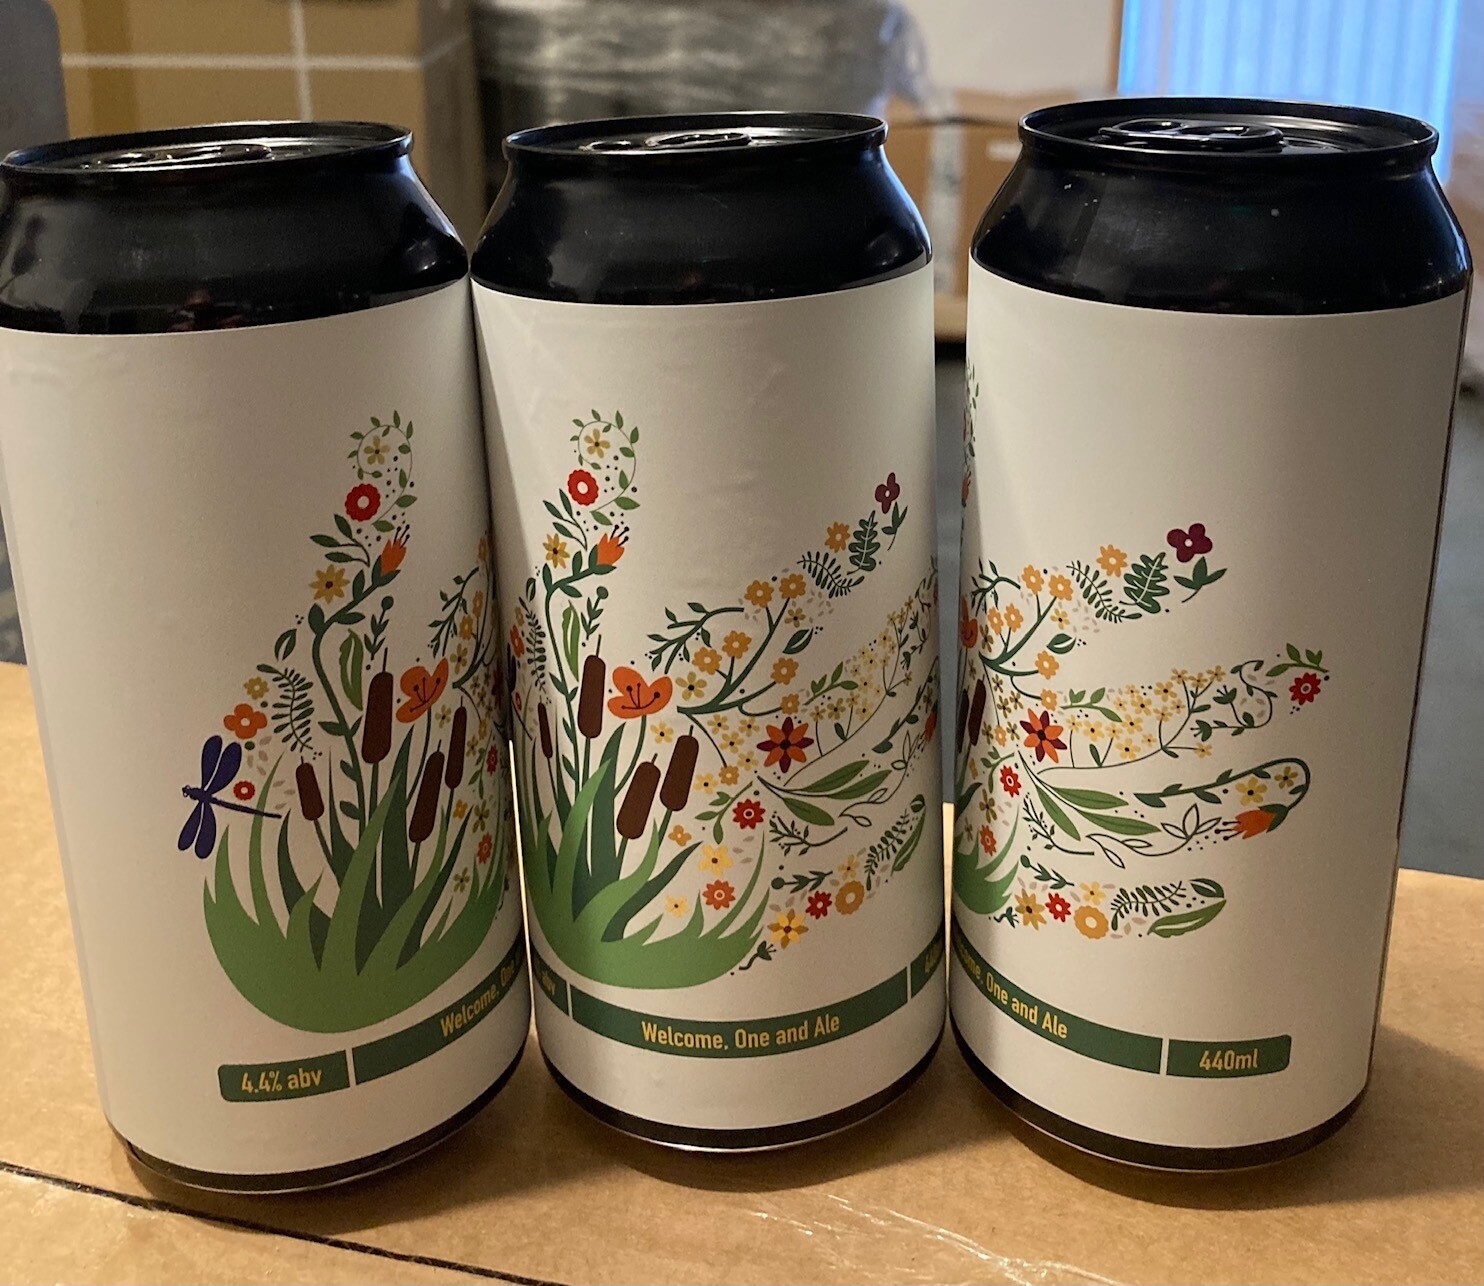 MILL MEADOW GUESTS ONLY - Welcome, One and Ale -  24 Case (440ml)